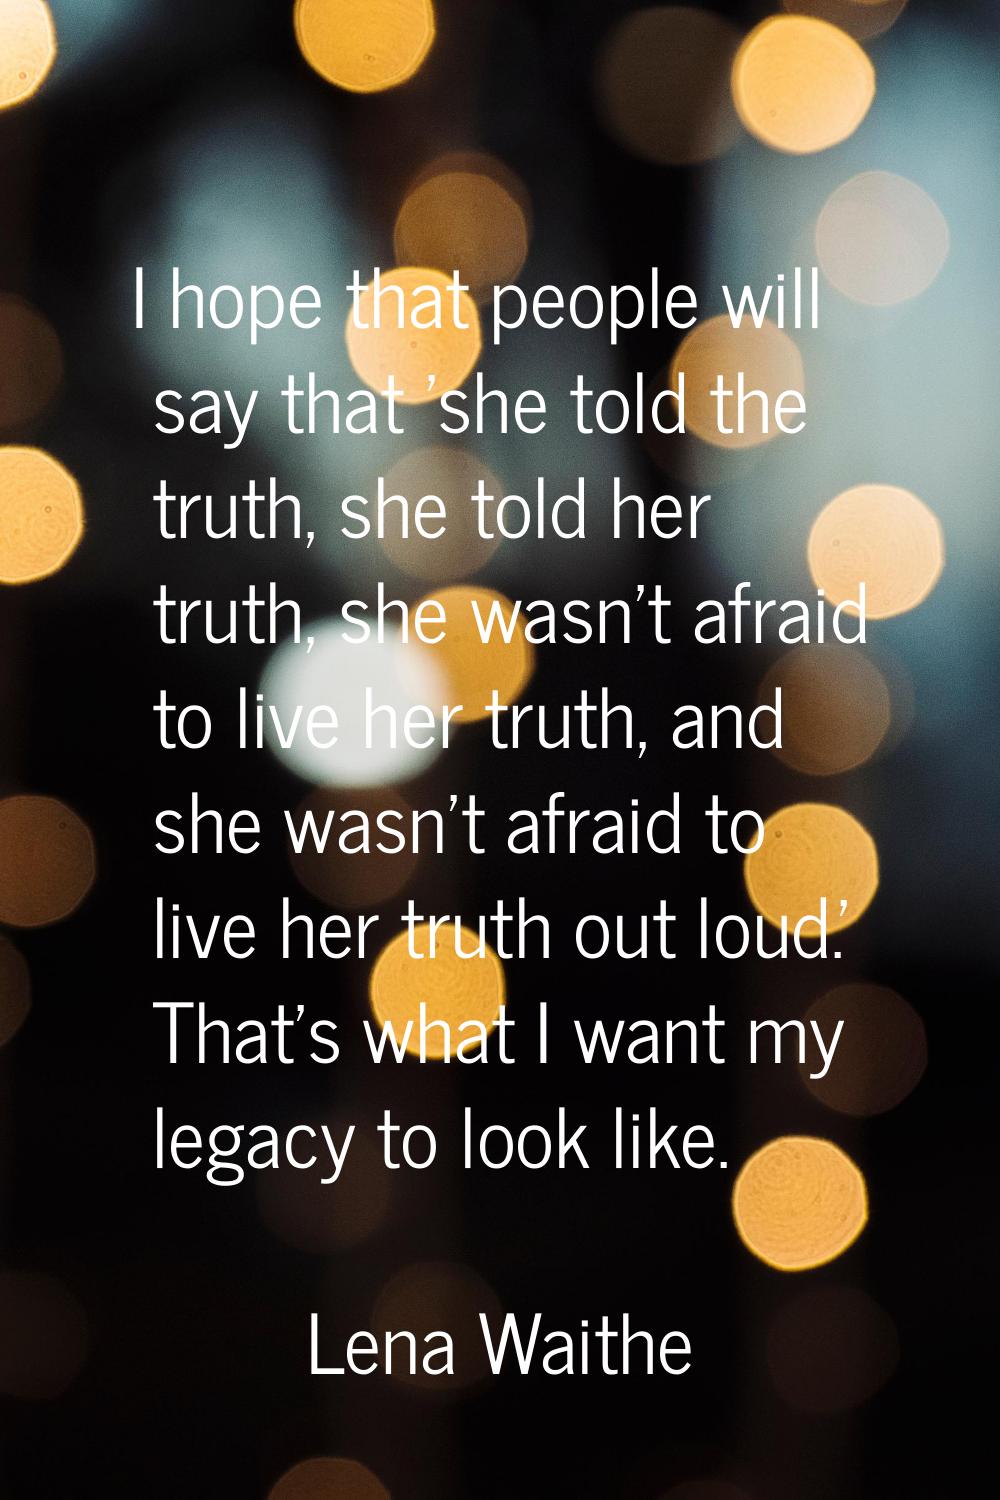 I hope that people will say that 'she told the truth, she told her truth, she wasn't afraid to live